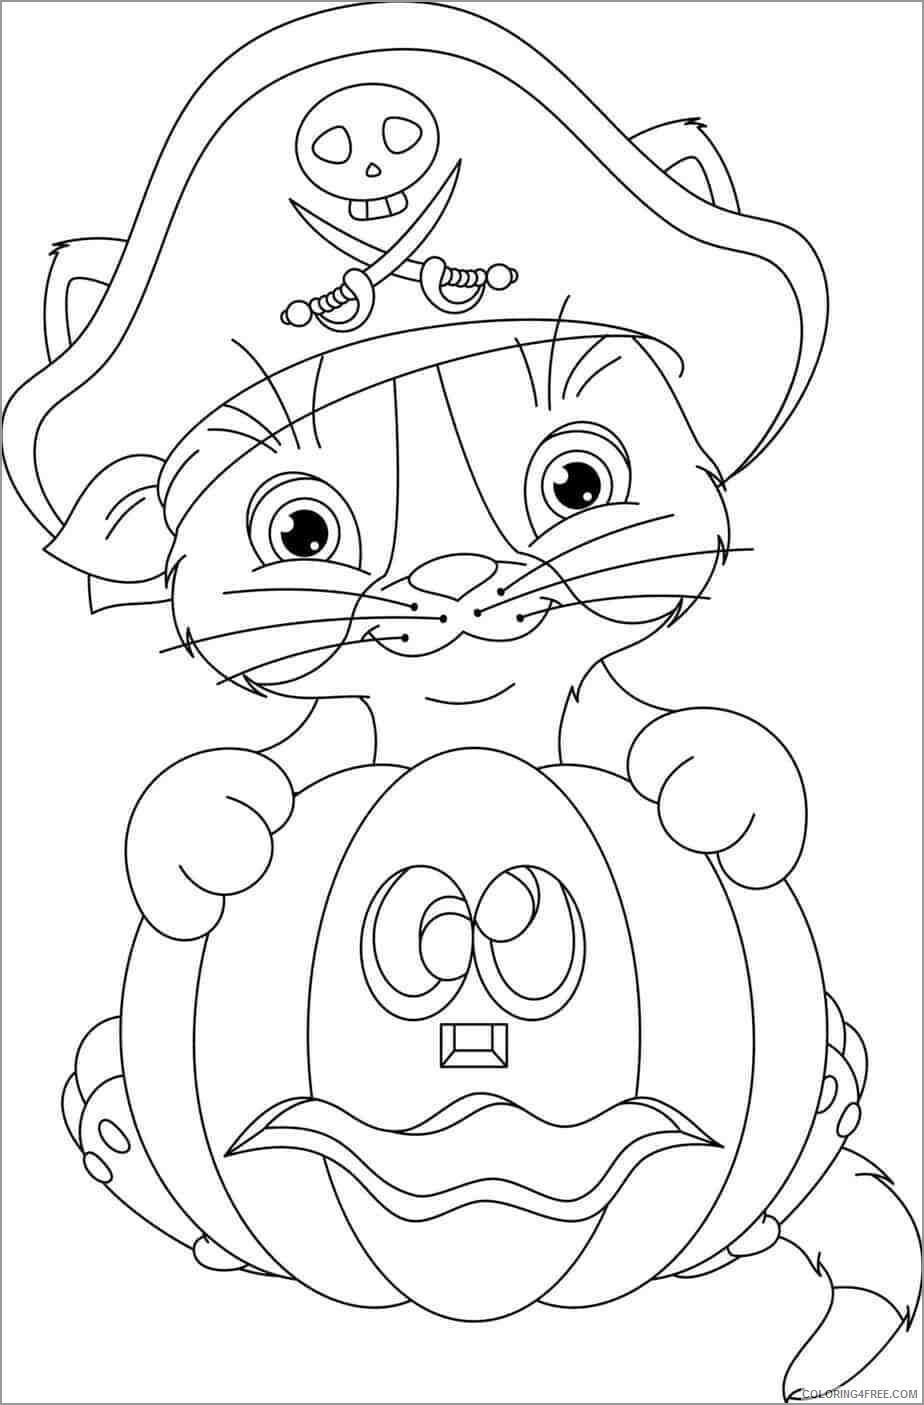 Pirates Coloring Pages for boys pirate baby kitten Printable 2020 0730 Coloring4free